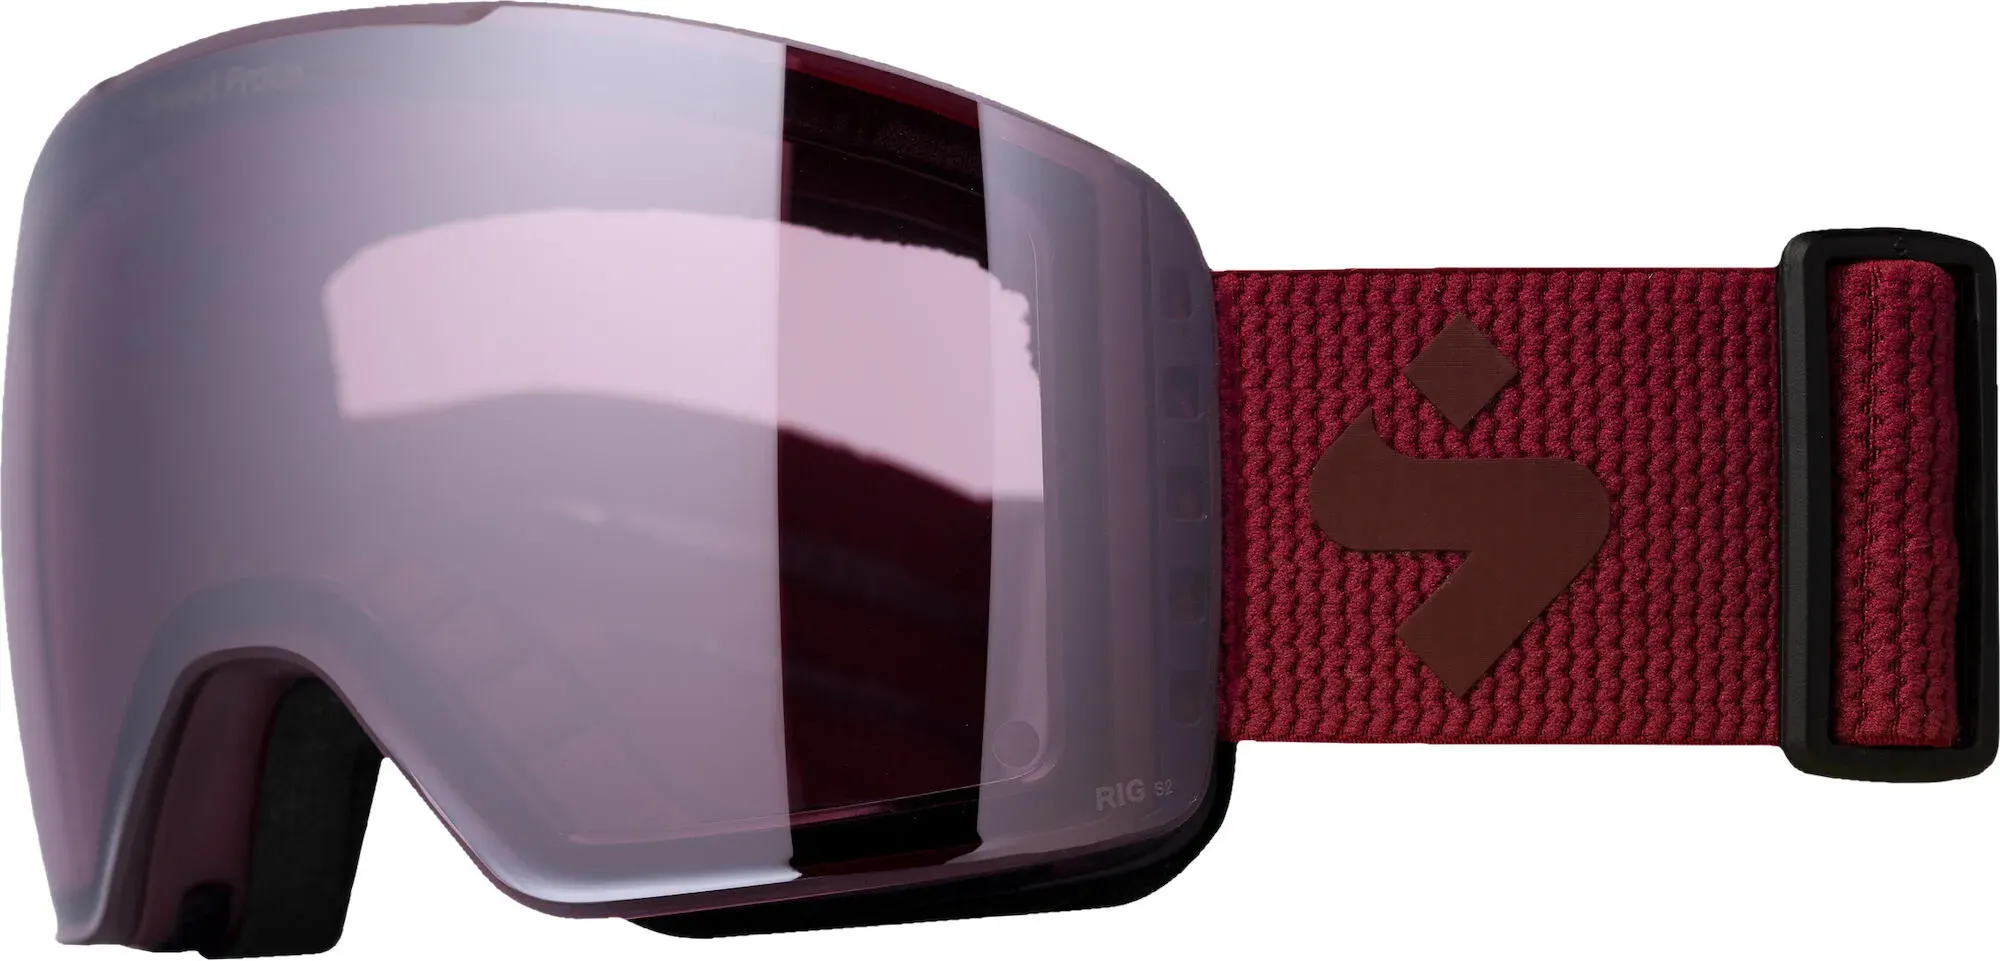 Sweet Protection Connor RIG Reflect Goggles rig malaia/crystal barbera/barbera trace em (193263) OS